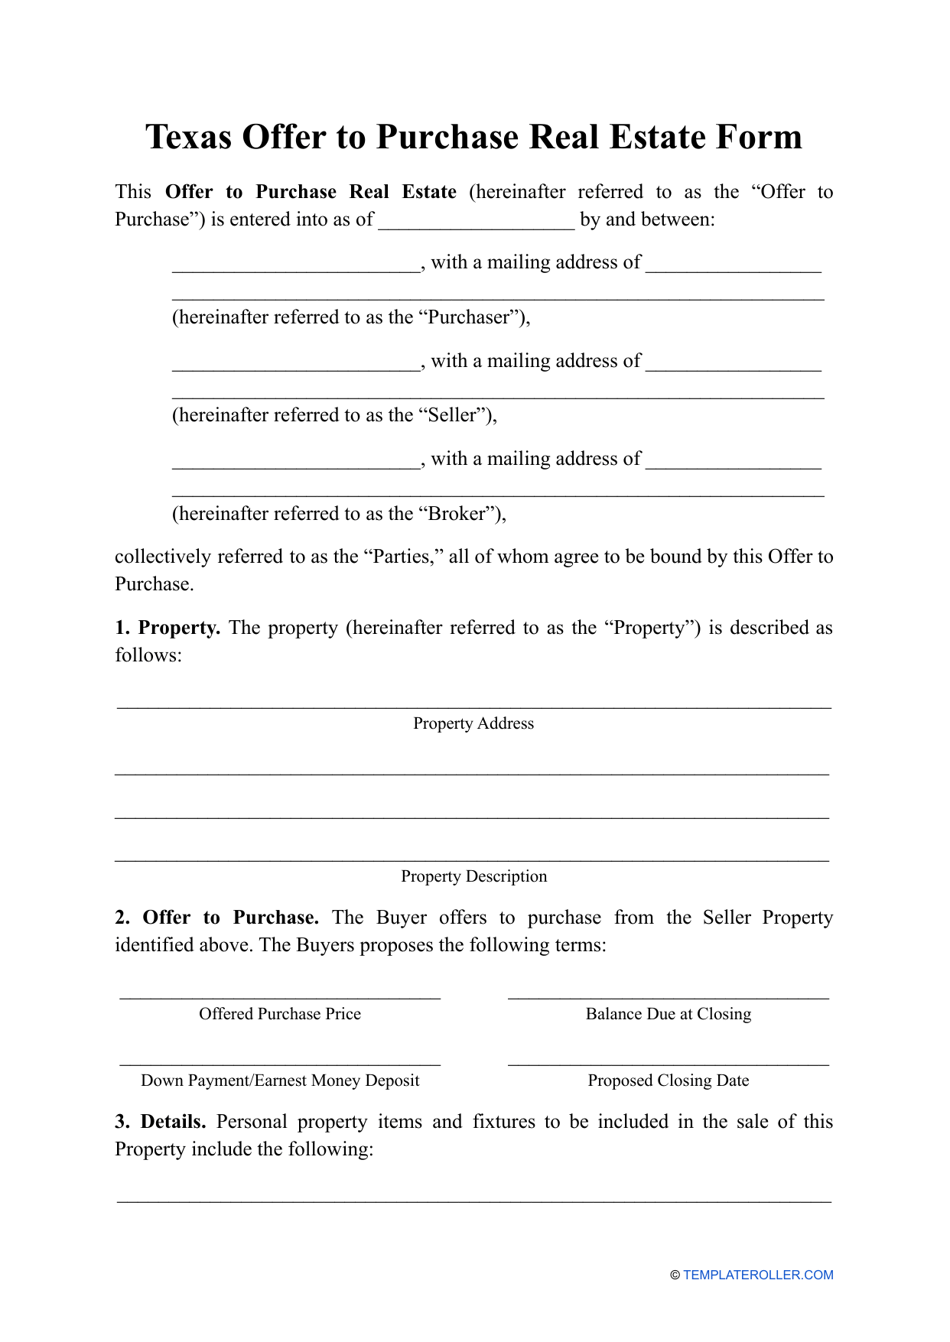 Offer to Purchase Real Estate Form - Texas, Page 1